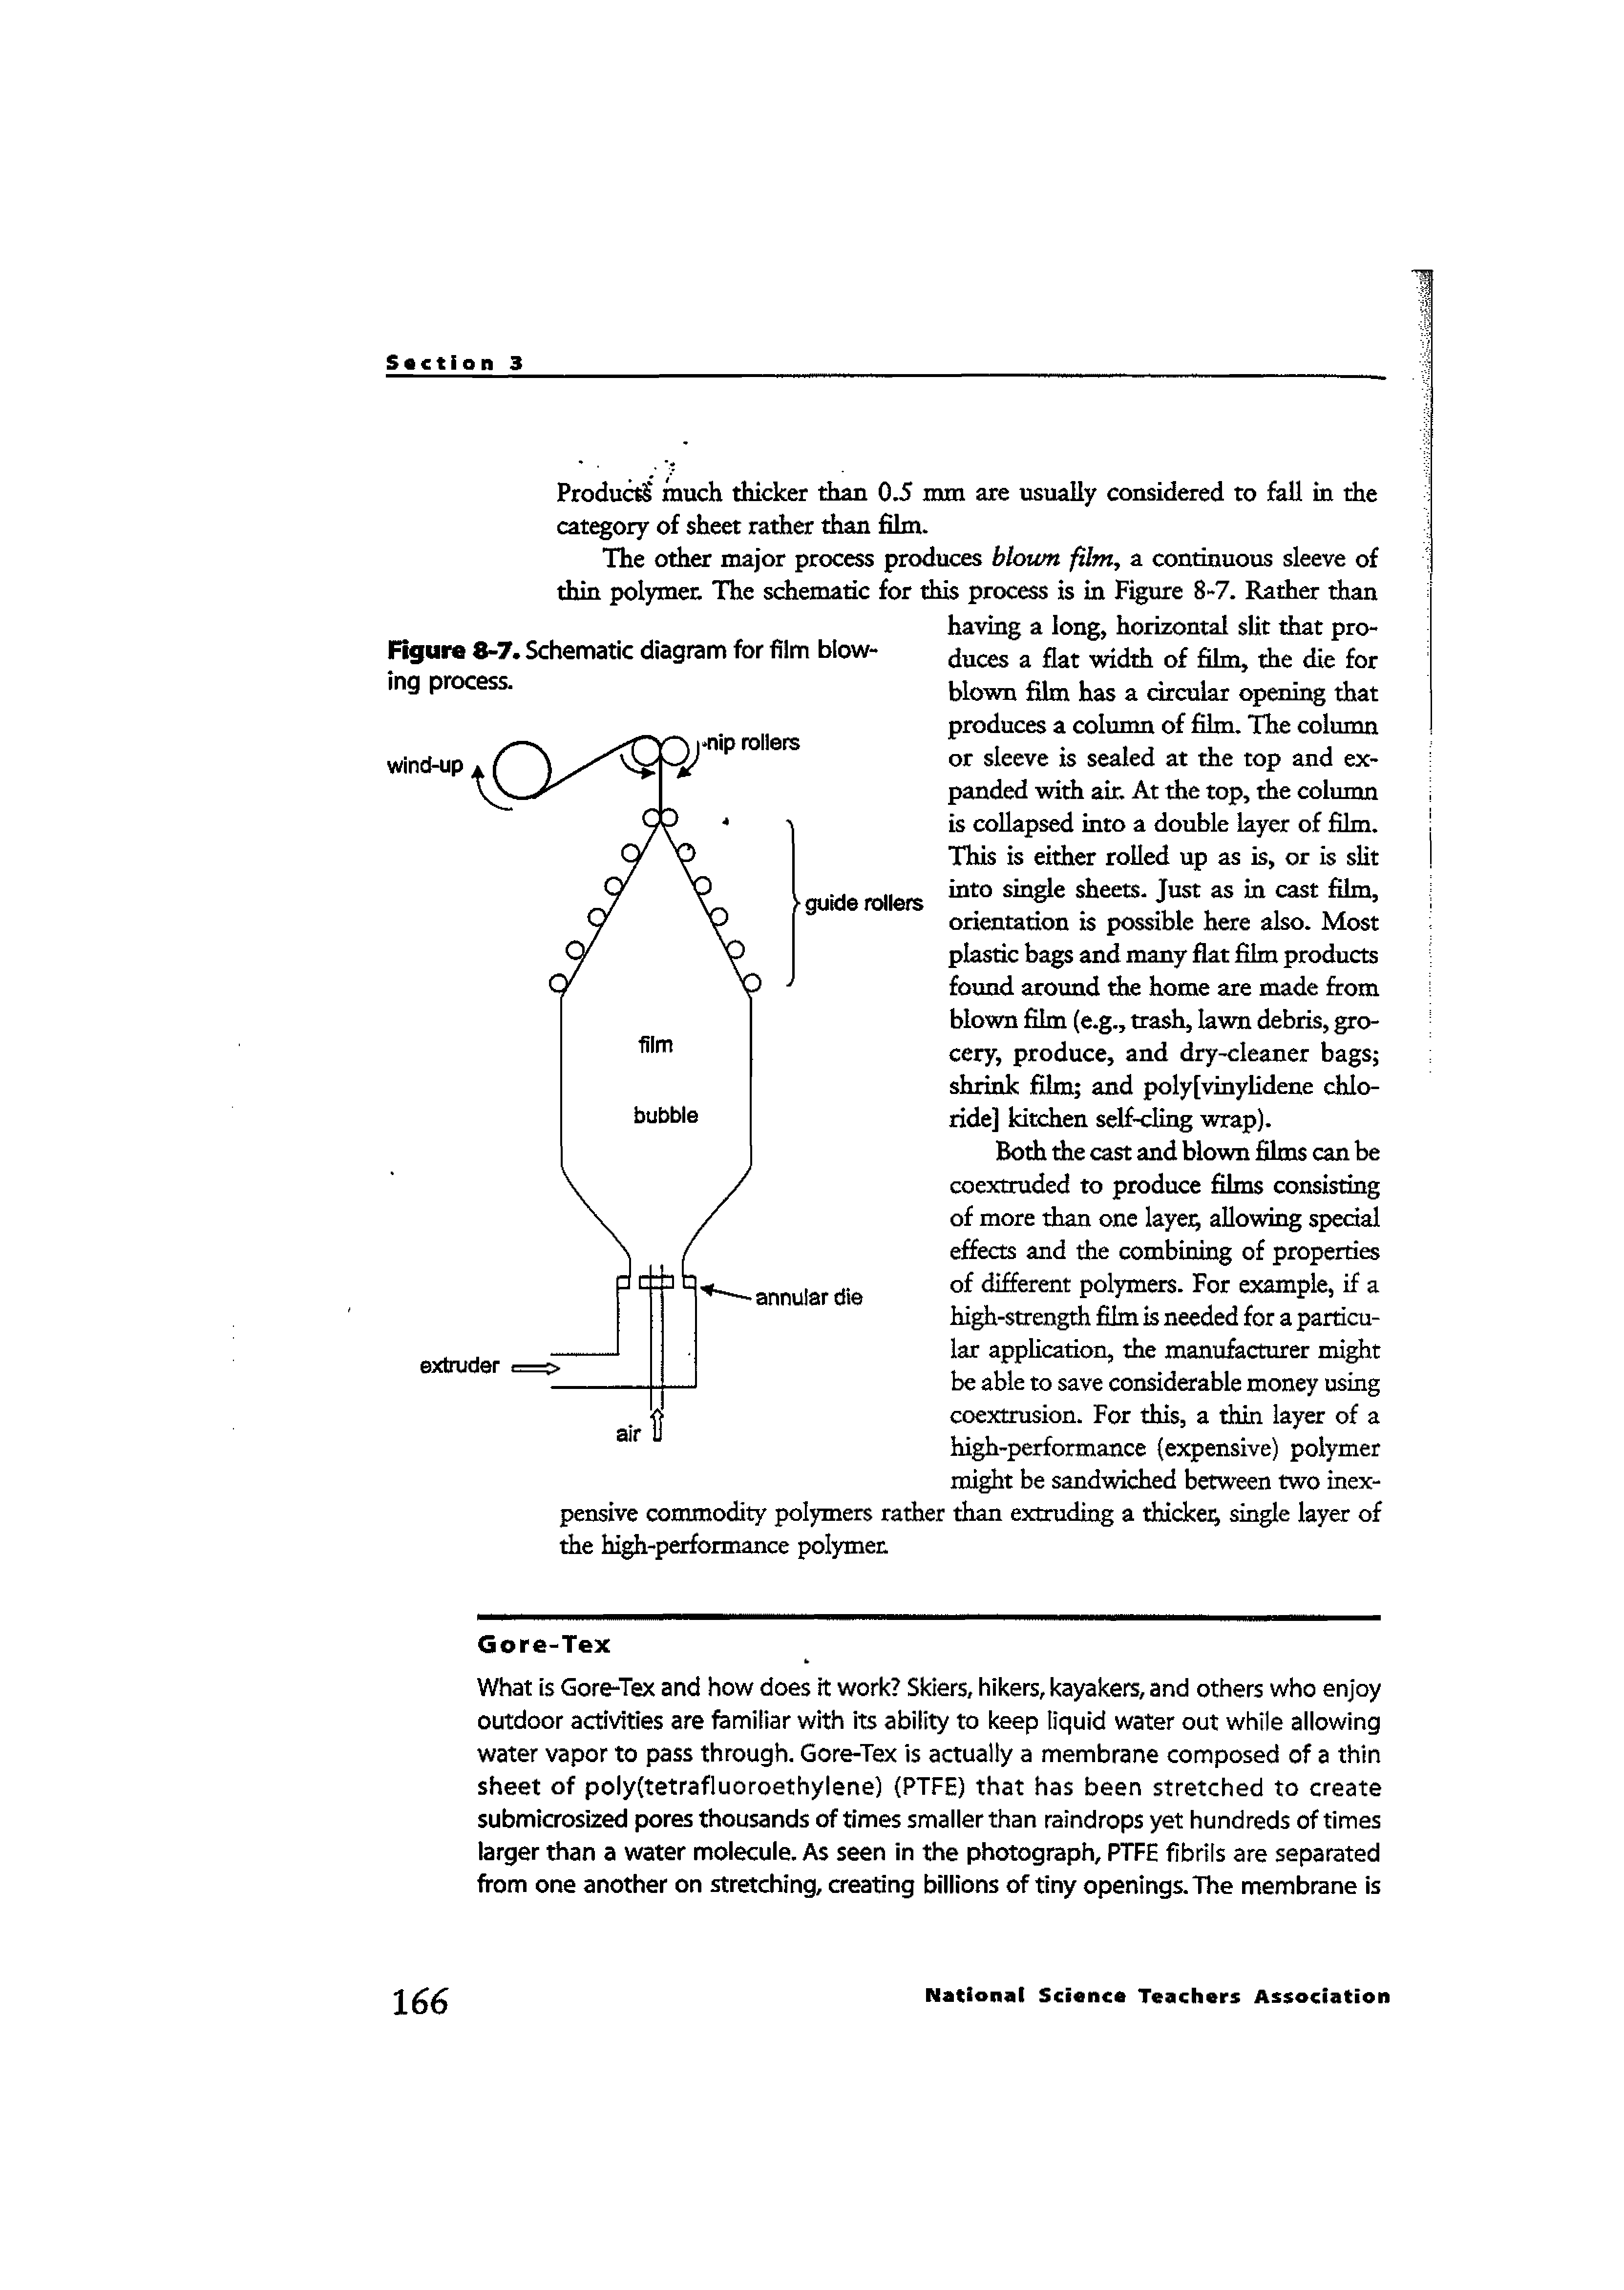 Figure 8-7. Schematic diagram for film blowing process.